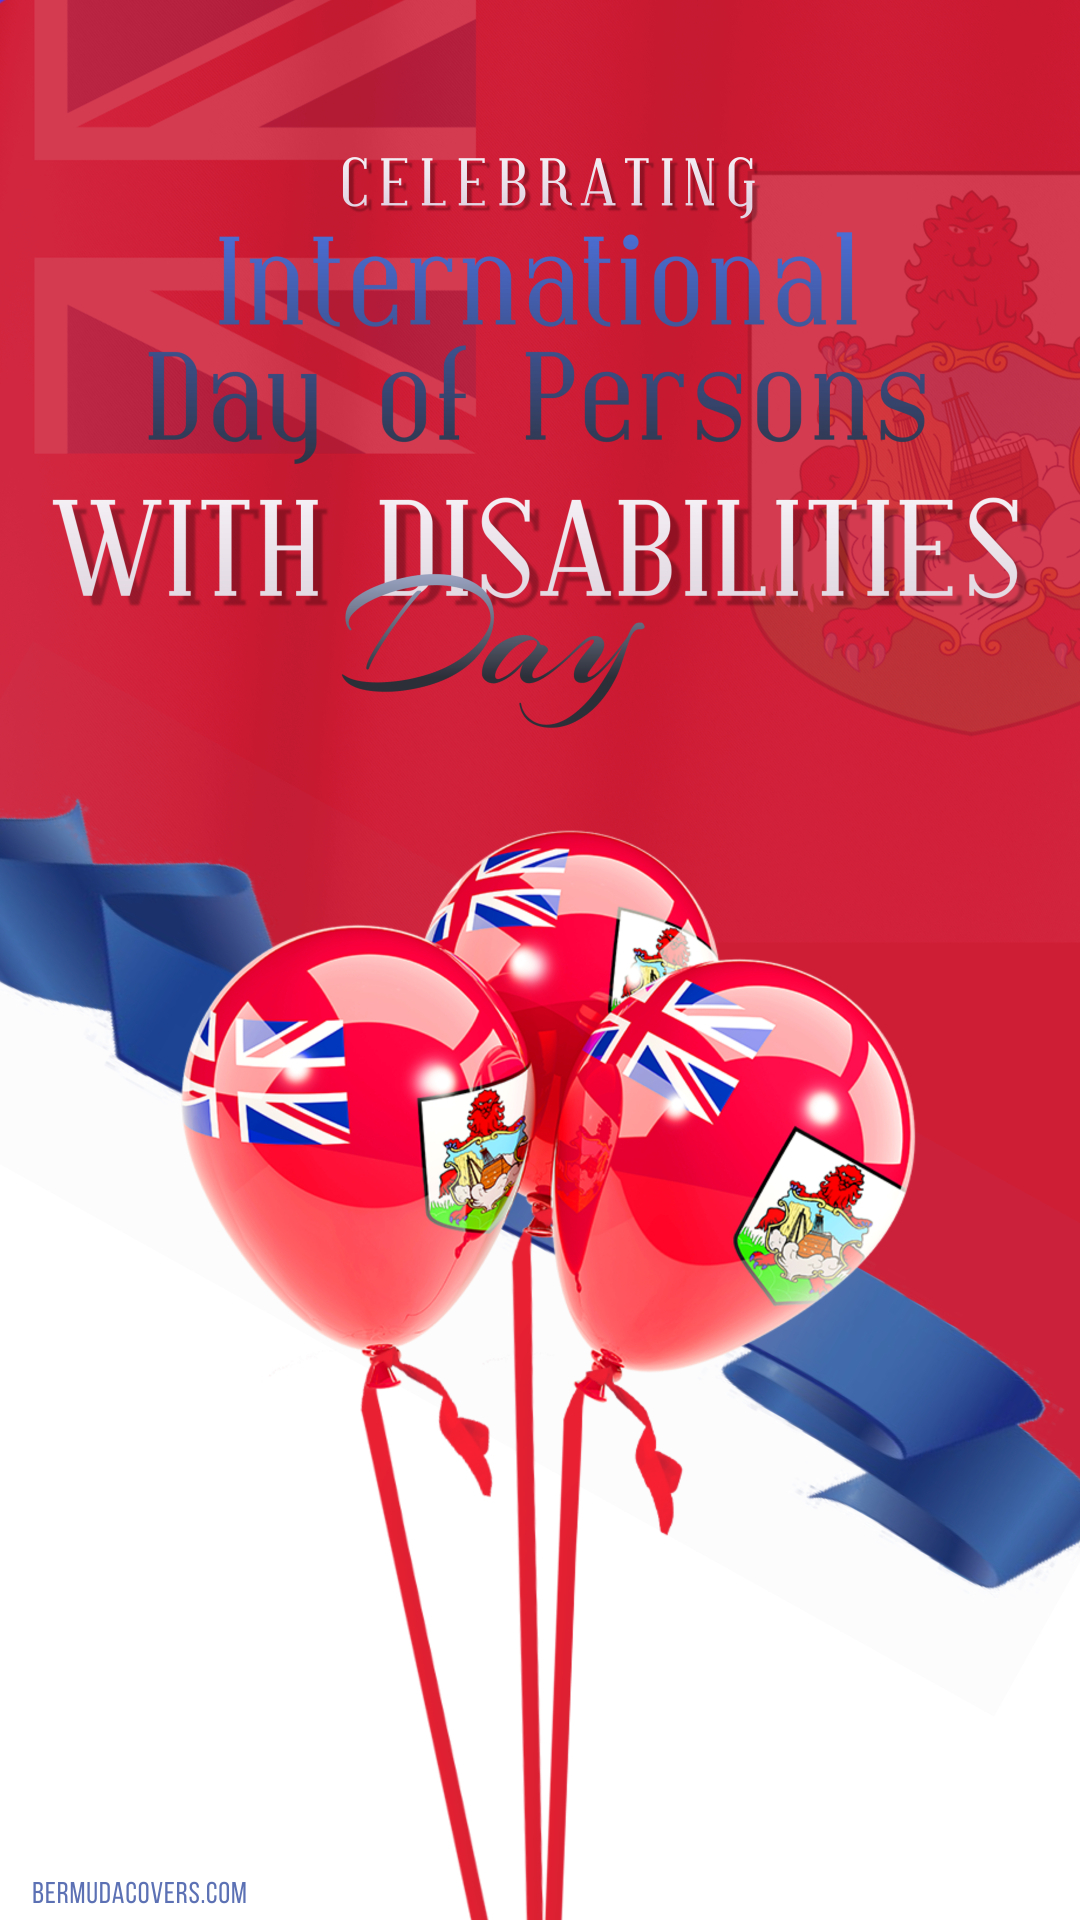 Red & Blue International Day of Persons with Disabilities Bermuda phone wallpaper image balloon 238432822 (1)